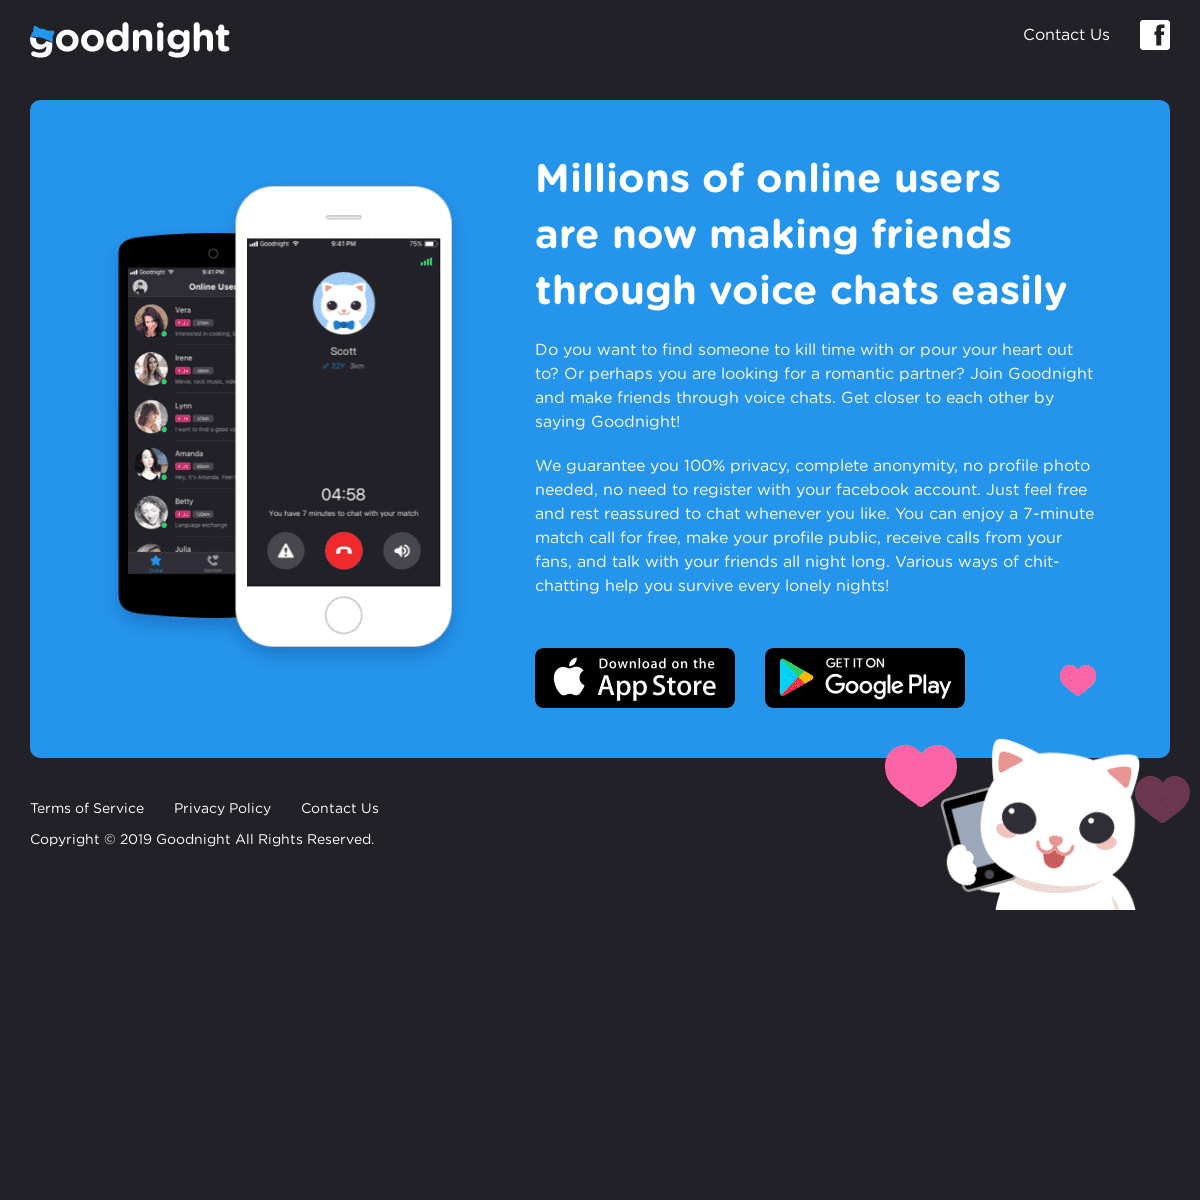 A complete backup of goodnight.io